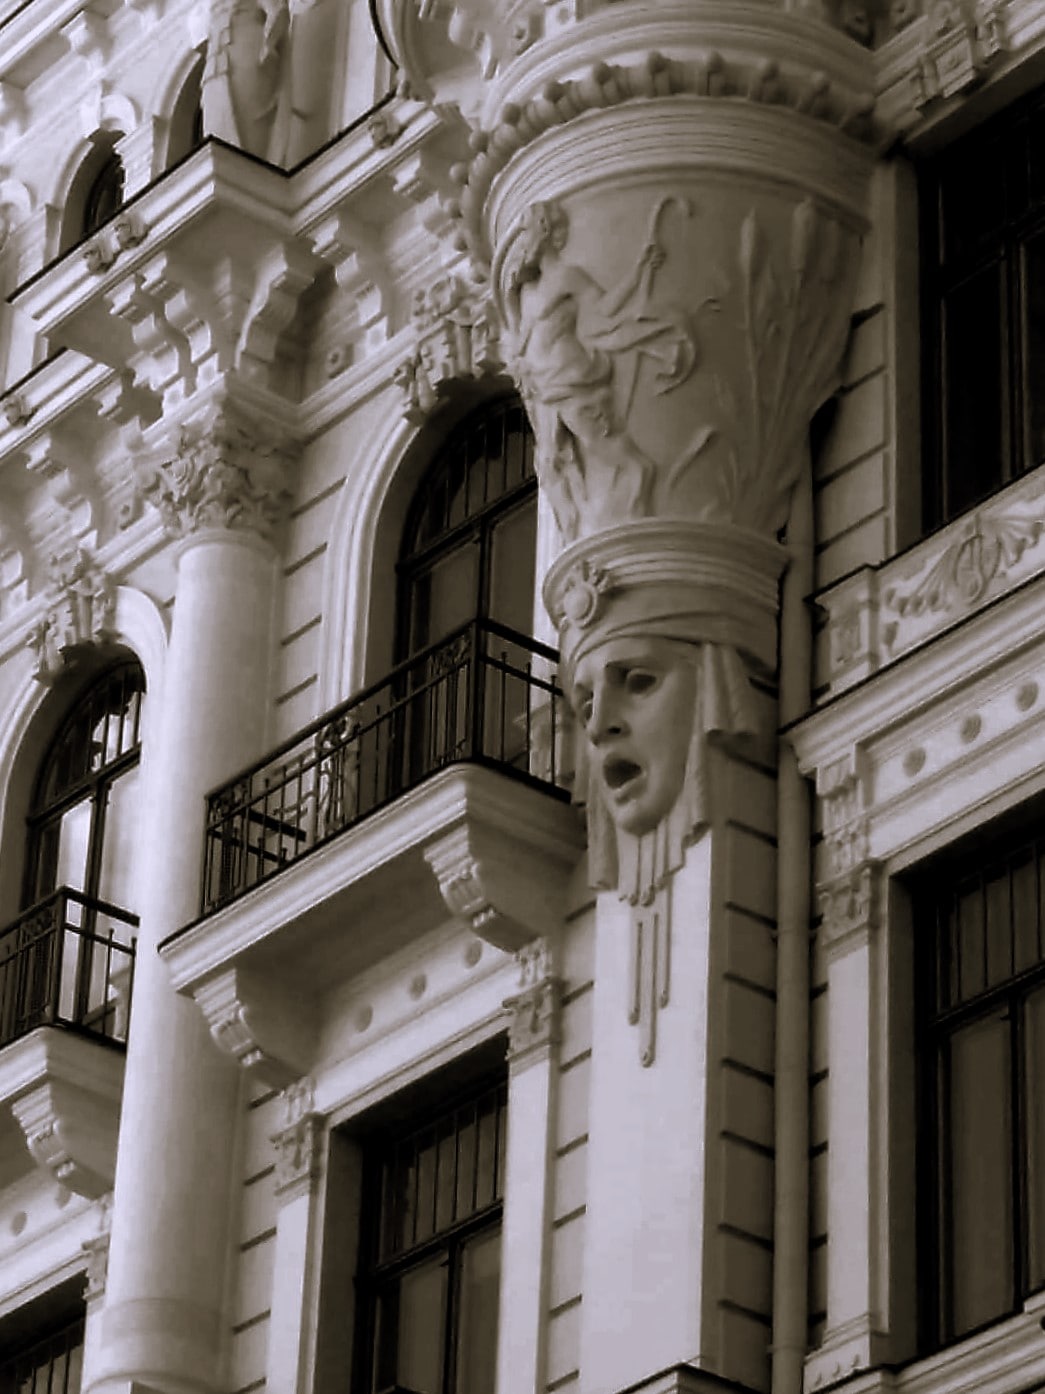 A haunting fascia on an art nouveau style building in Riga, Latvia, depicting a blank-eyed, open-mouthed face.